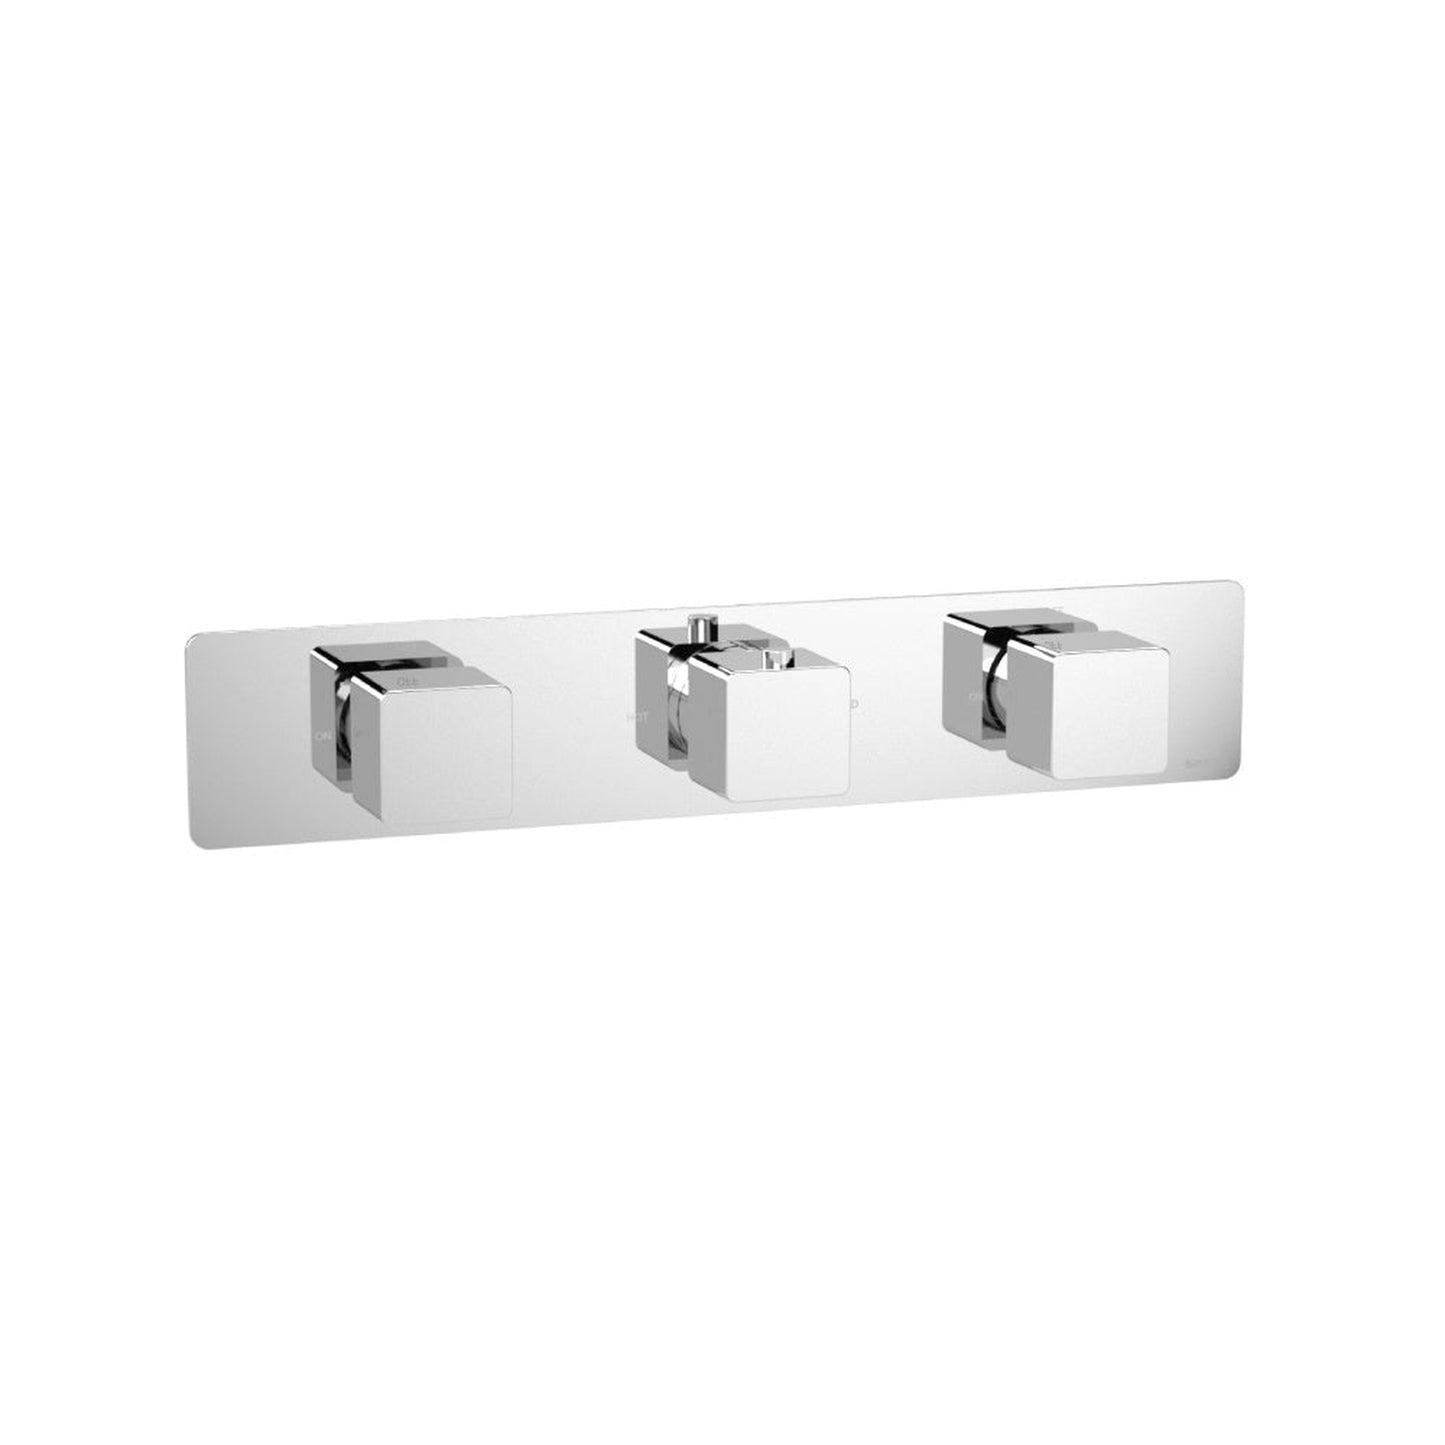 Isenberg Serie 196 3/4" Two Output Horizontal Thermostatic Valve With 2 Volume Control and Trim in Polished Nickel